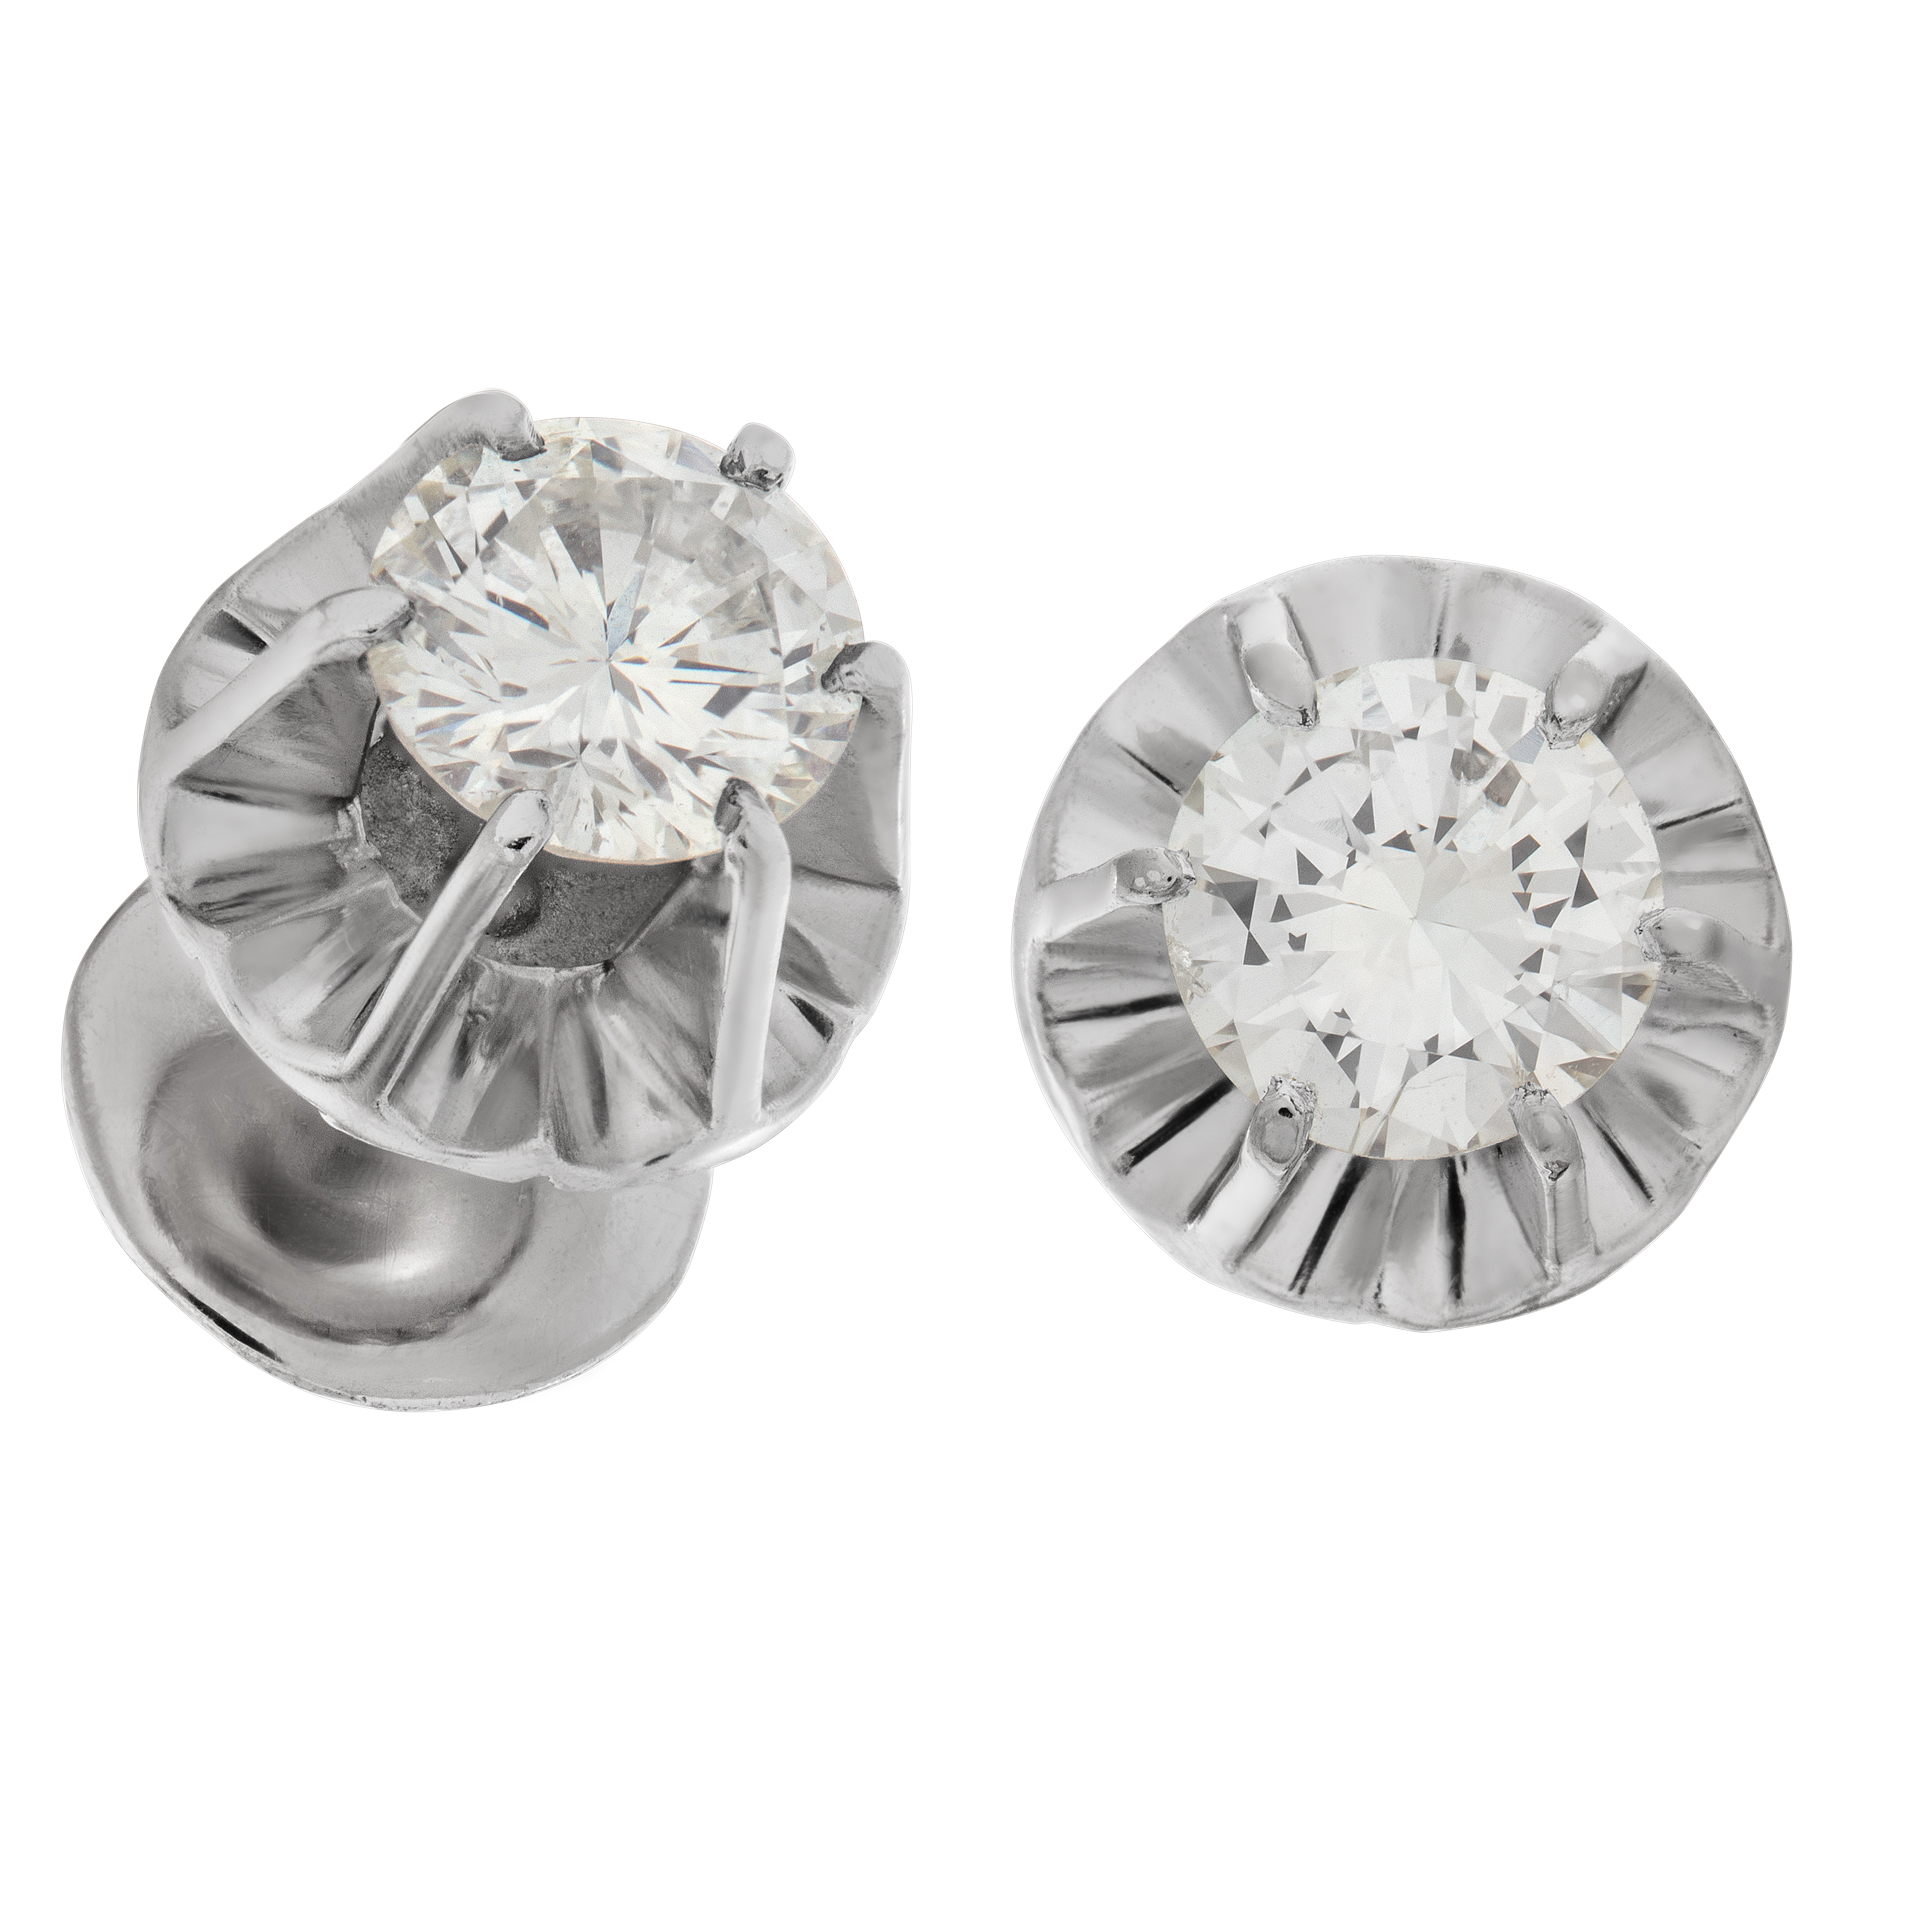 Shiny and sweet Diamond studs. 0.90 carats (J color, SI1 clarity) set in platinum image 2